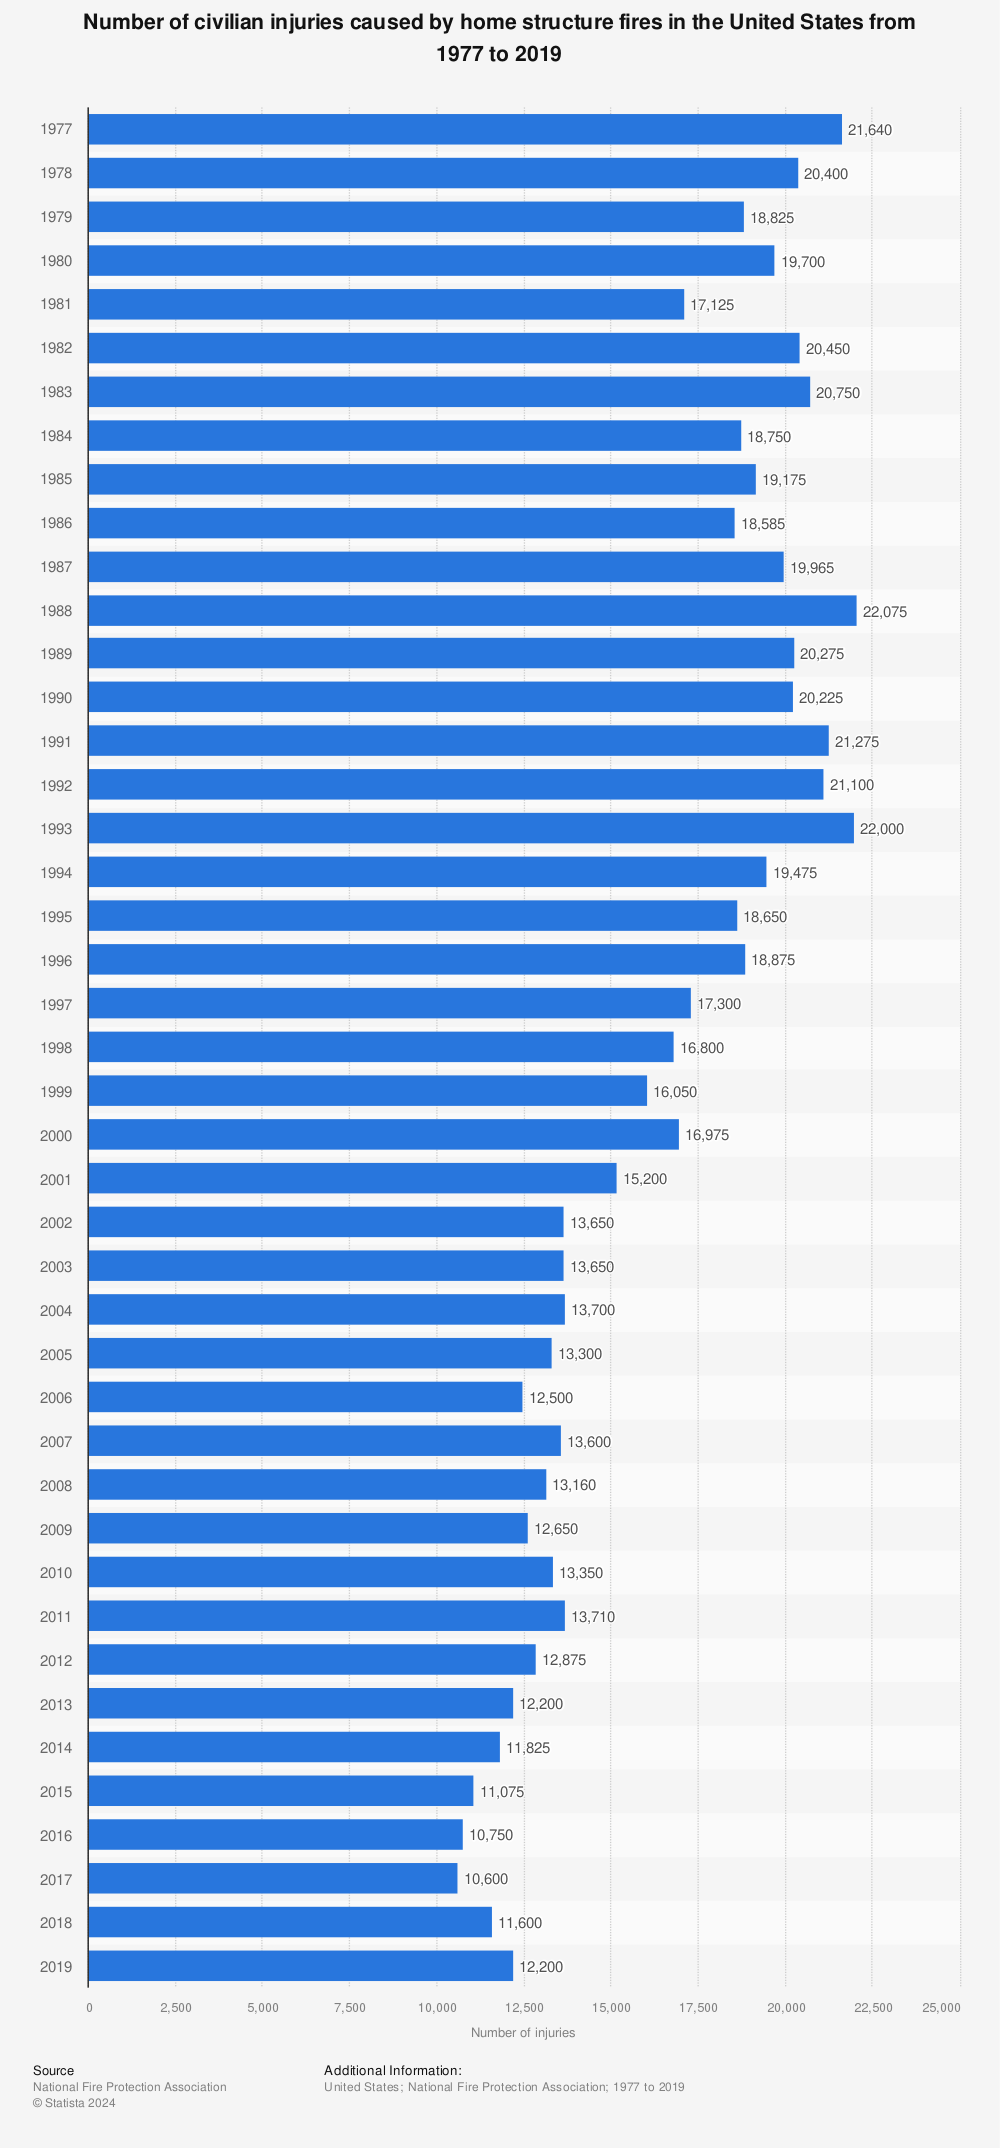 Statistic: Number of civilian injuries caused by home structure fires in the United States from 1977 to 2019 | Statista